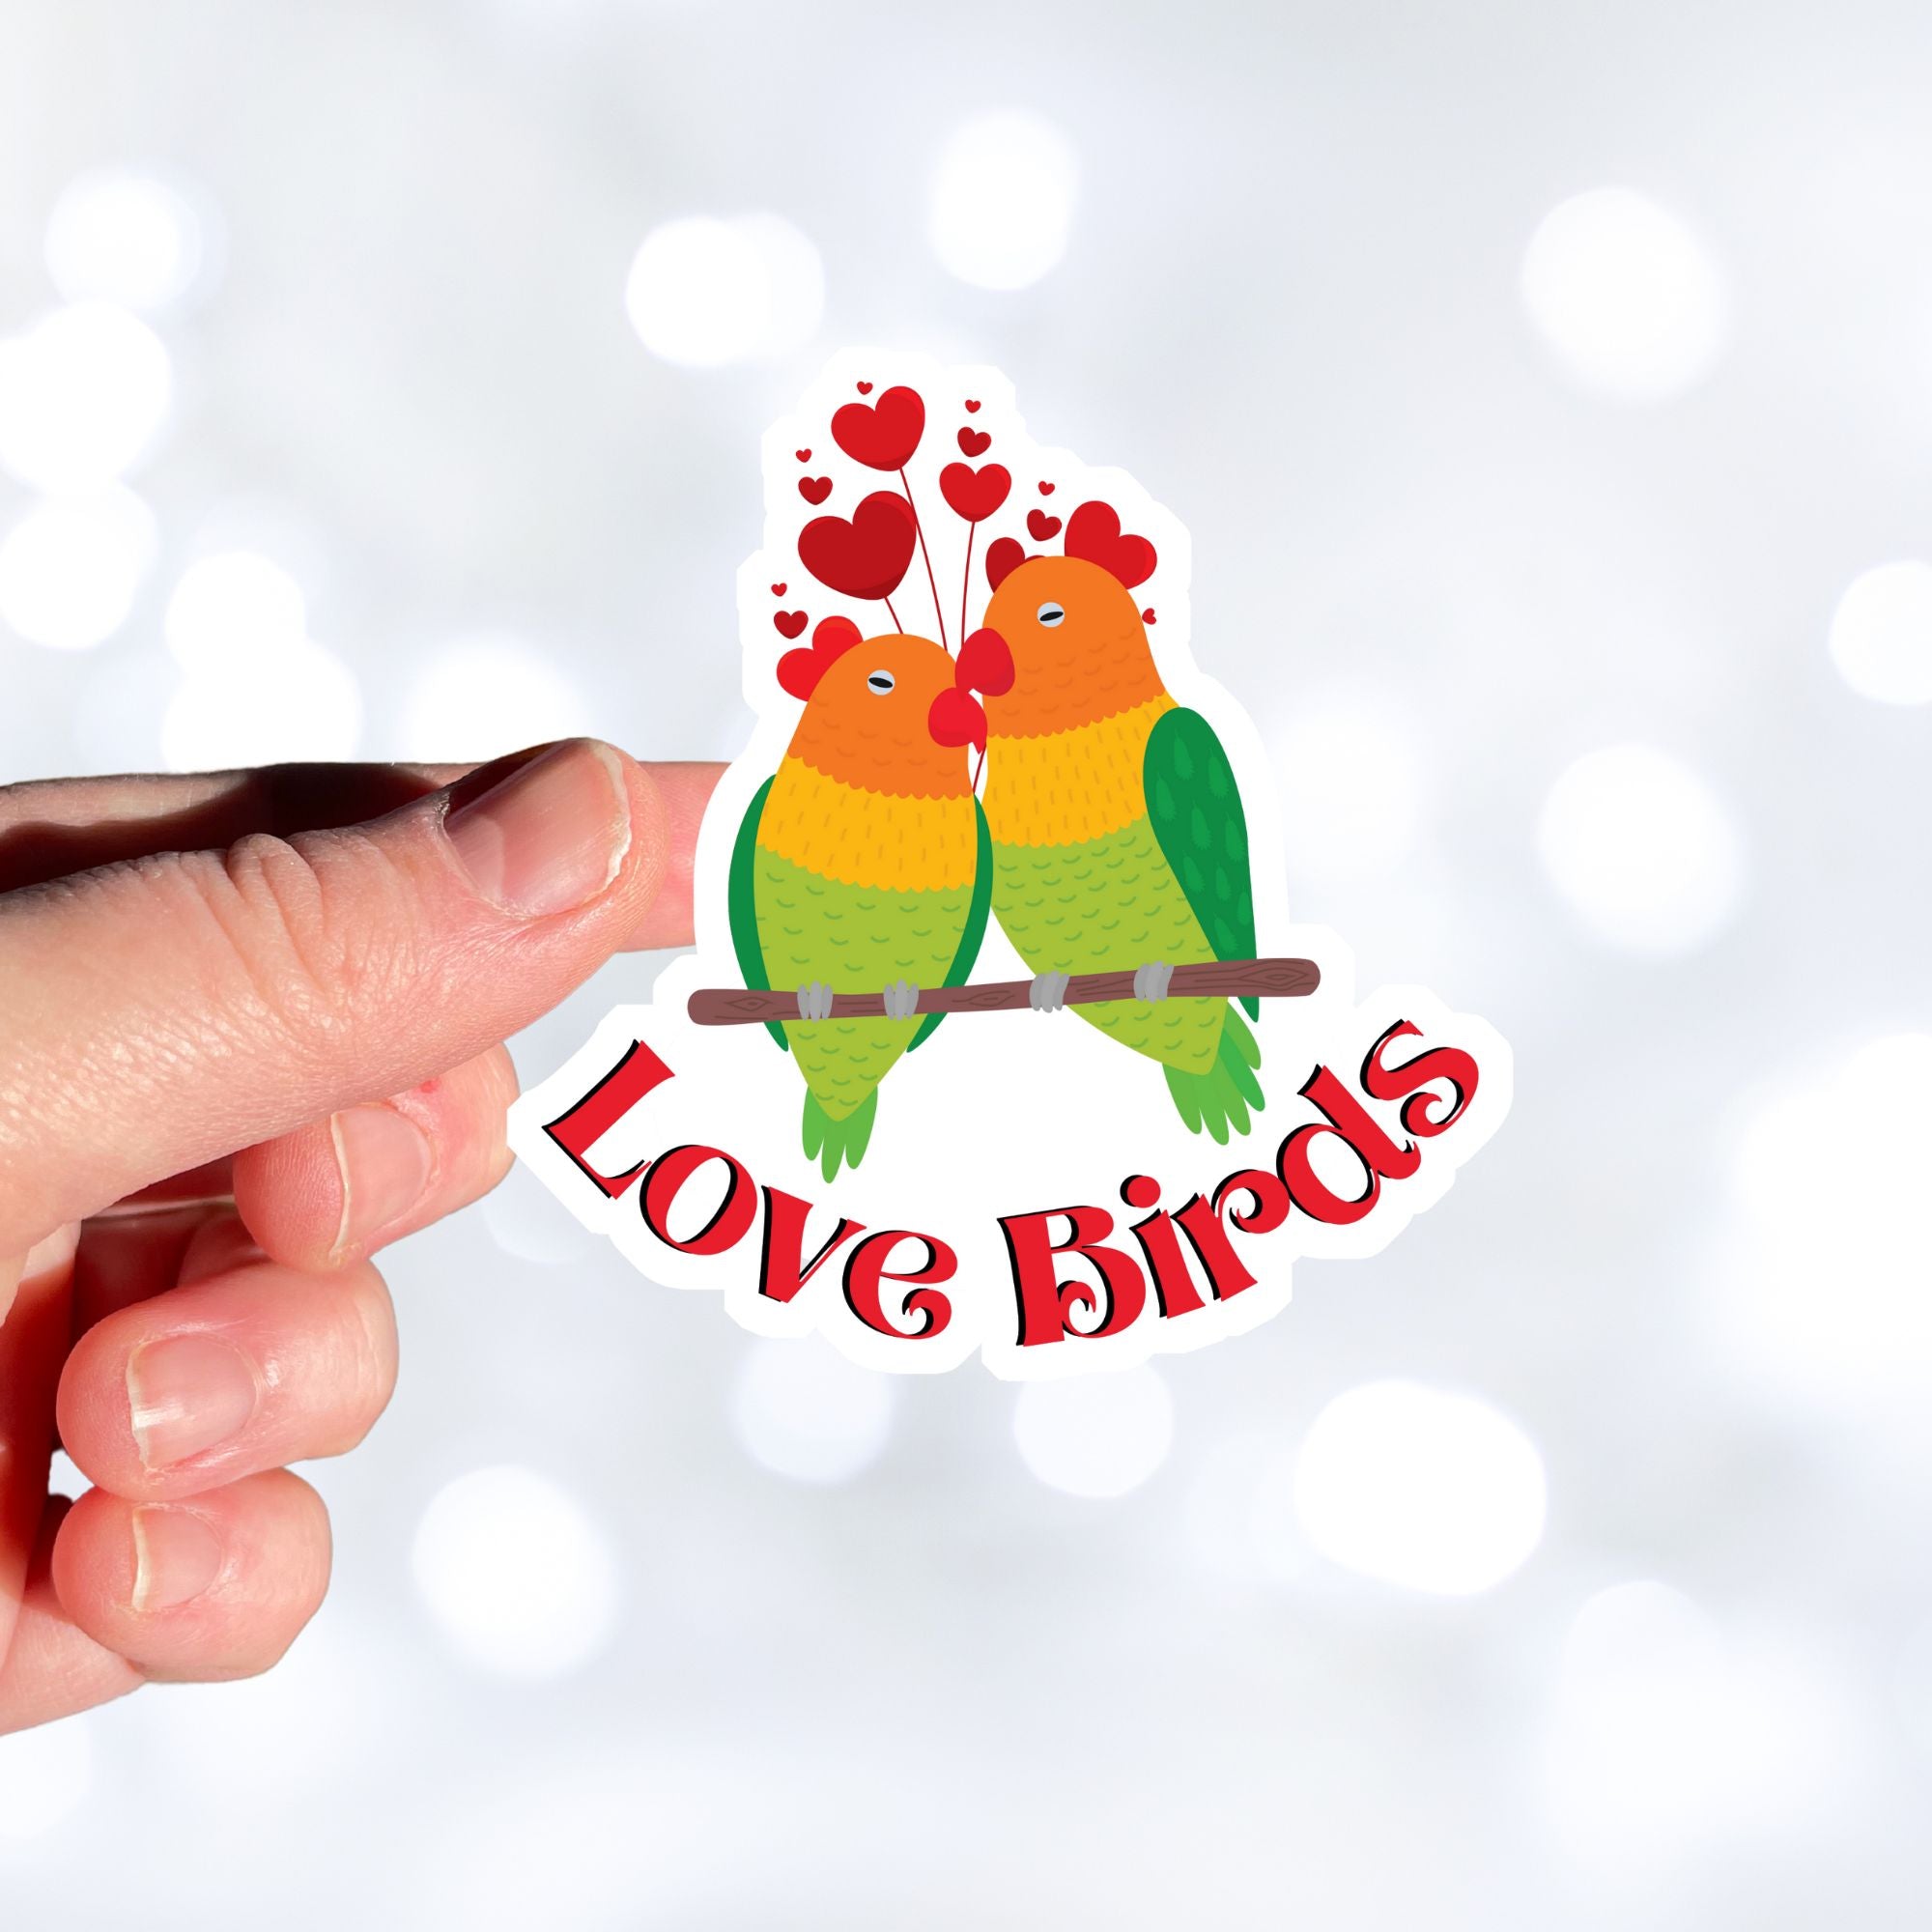 Aww, Love Birds! This individual die-cut sticker features a pair of love birds with hearts above. This is a perfect gift for your love bird! This image shows a hand holding the Love Birds sticker.